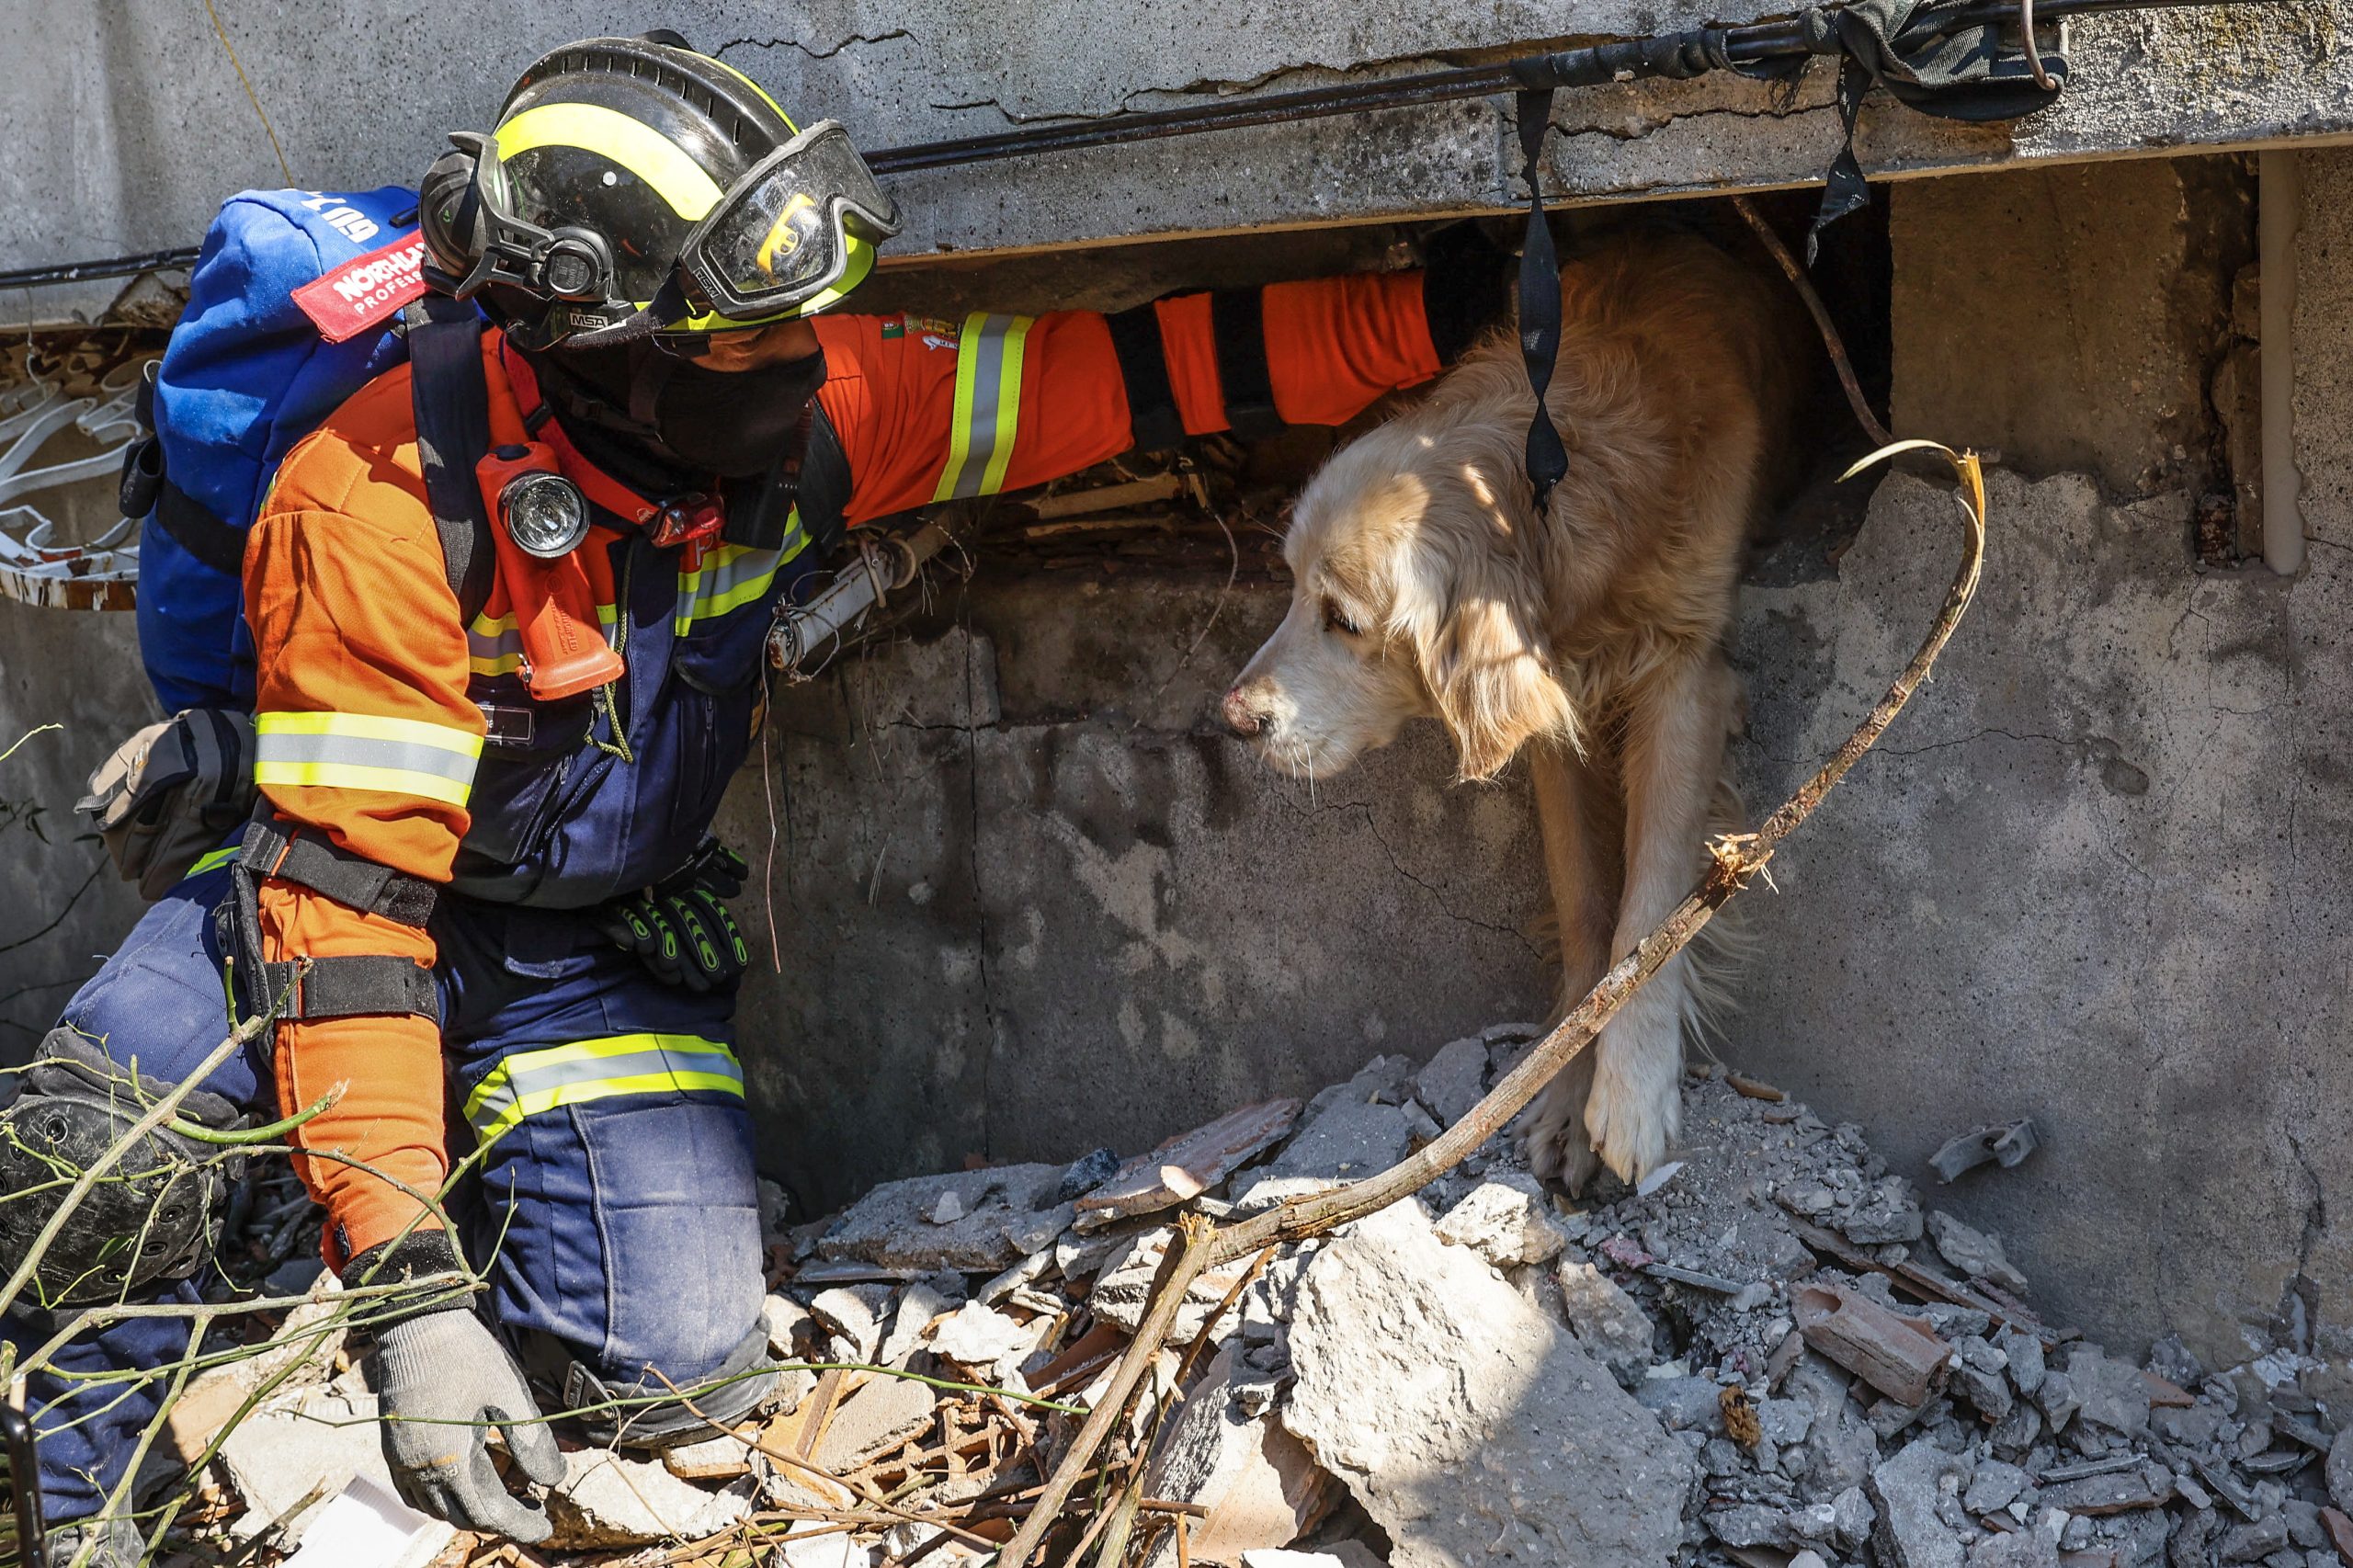 epa10466799 Portuguese rescue team members are trying to free the dog named Tarcin (Cinnamon) in a building that collapsed during the earthquake in Antakya capital of Hatay Province, Turkey, 14 February 2023. A team from Portugal of 53 Civil Protection, GNR, and emergency medical personnel left 08 February, for Turkey to support search and rescue efforts after 06 February earthquake, in which more than 37,000 people died and thousands more were injured.  EPA/JOAO RELVAS